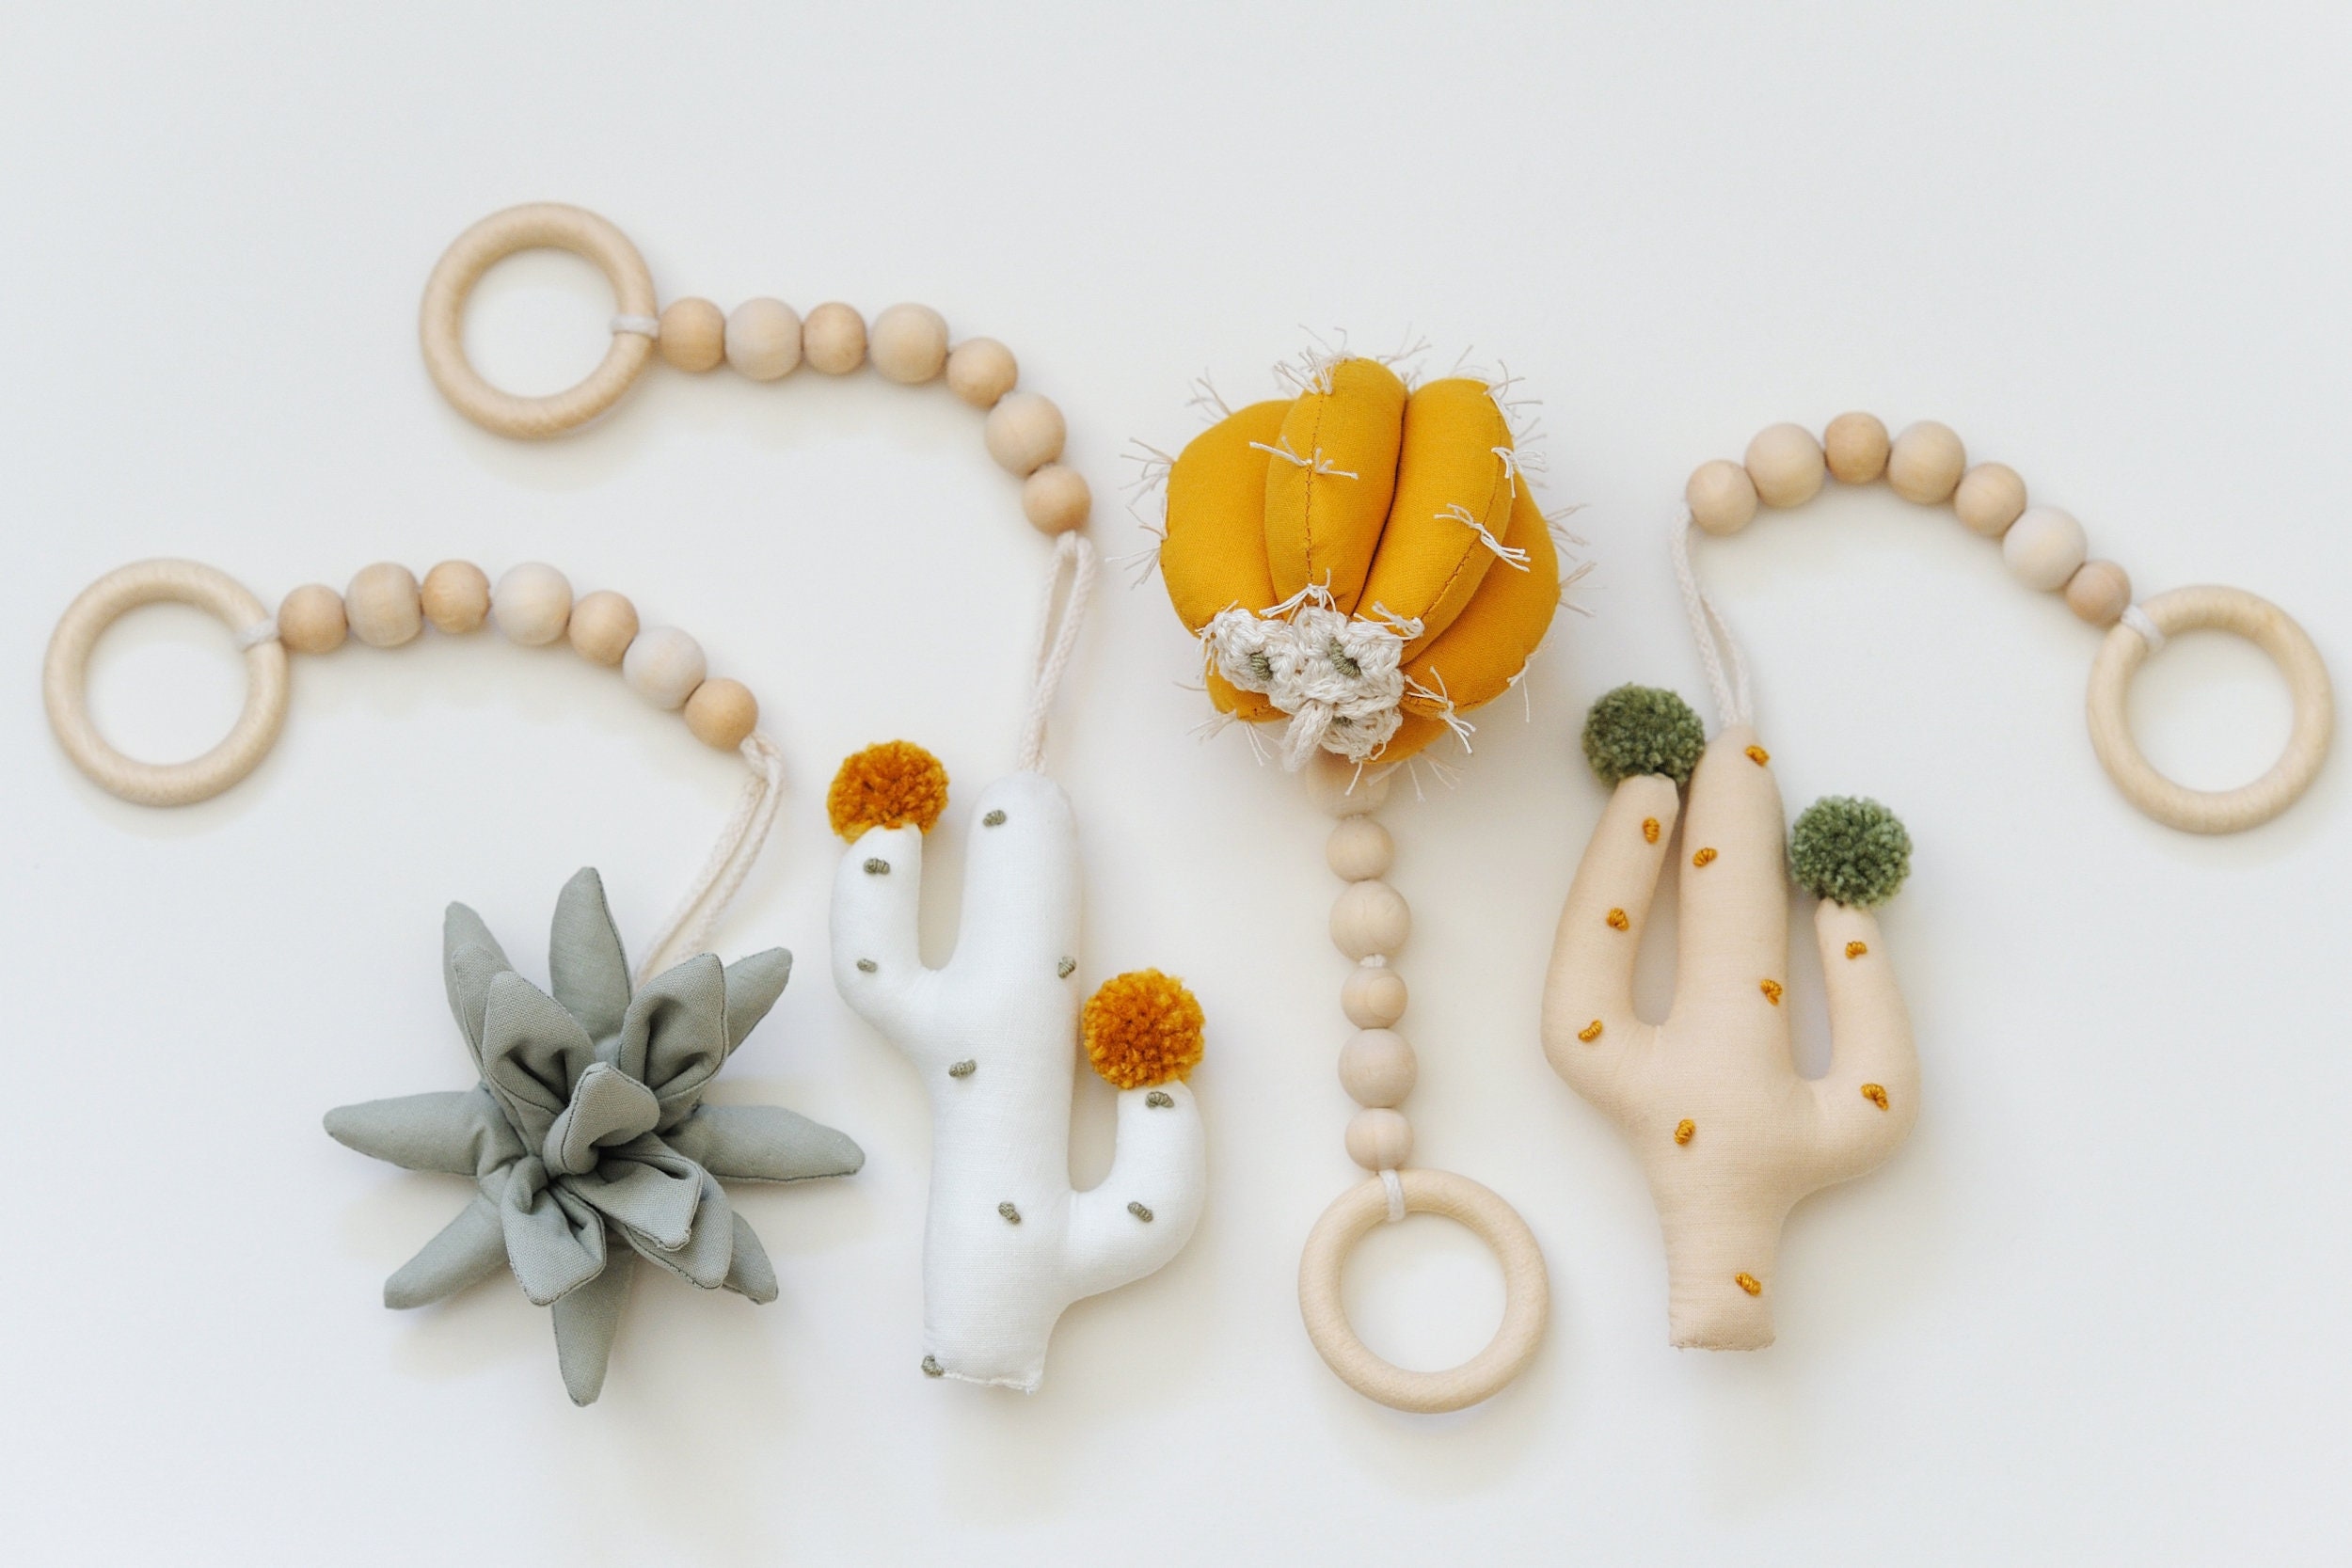 Desert Baby shower gift play gym wood Activity center accessories Handmade Gender neutral Mobiles ONLY Boho cactus wooden baby gym mobiles set of 3 Saguaro 